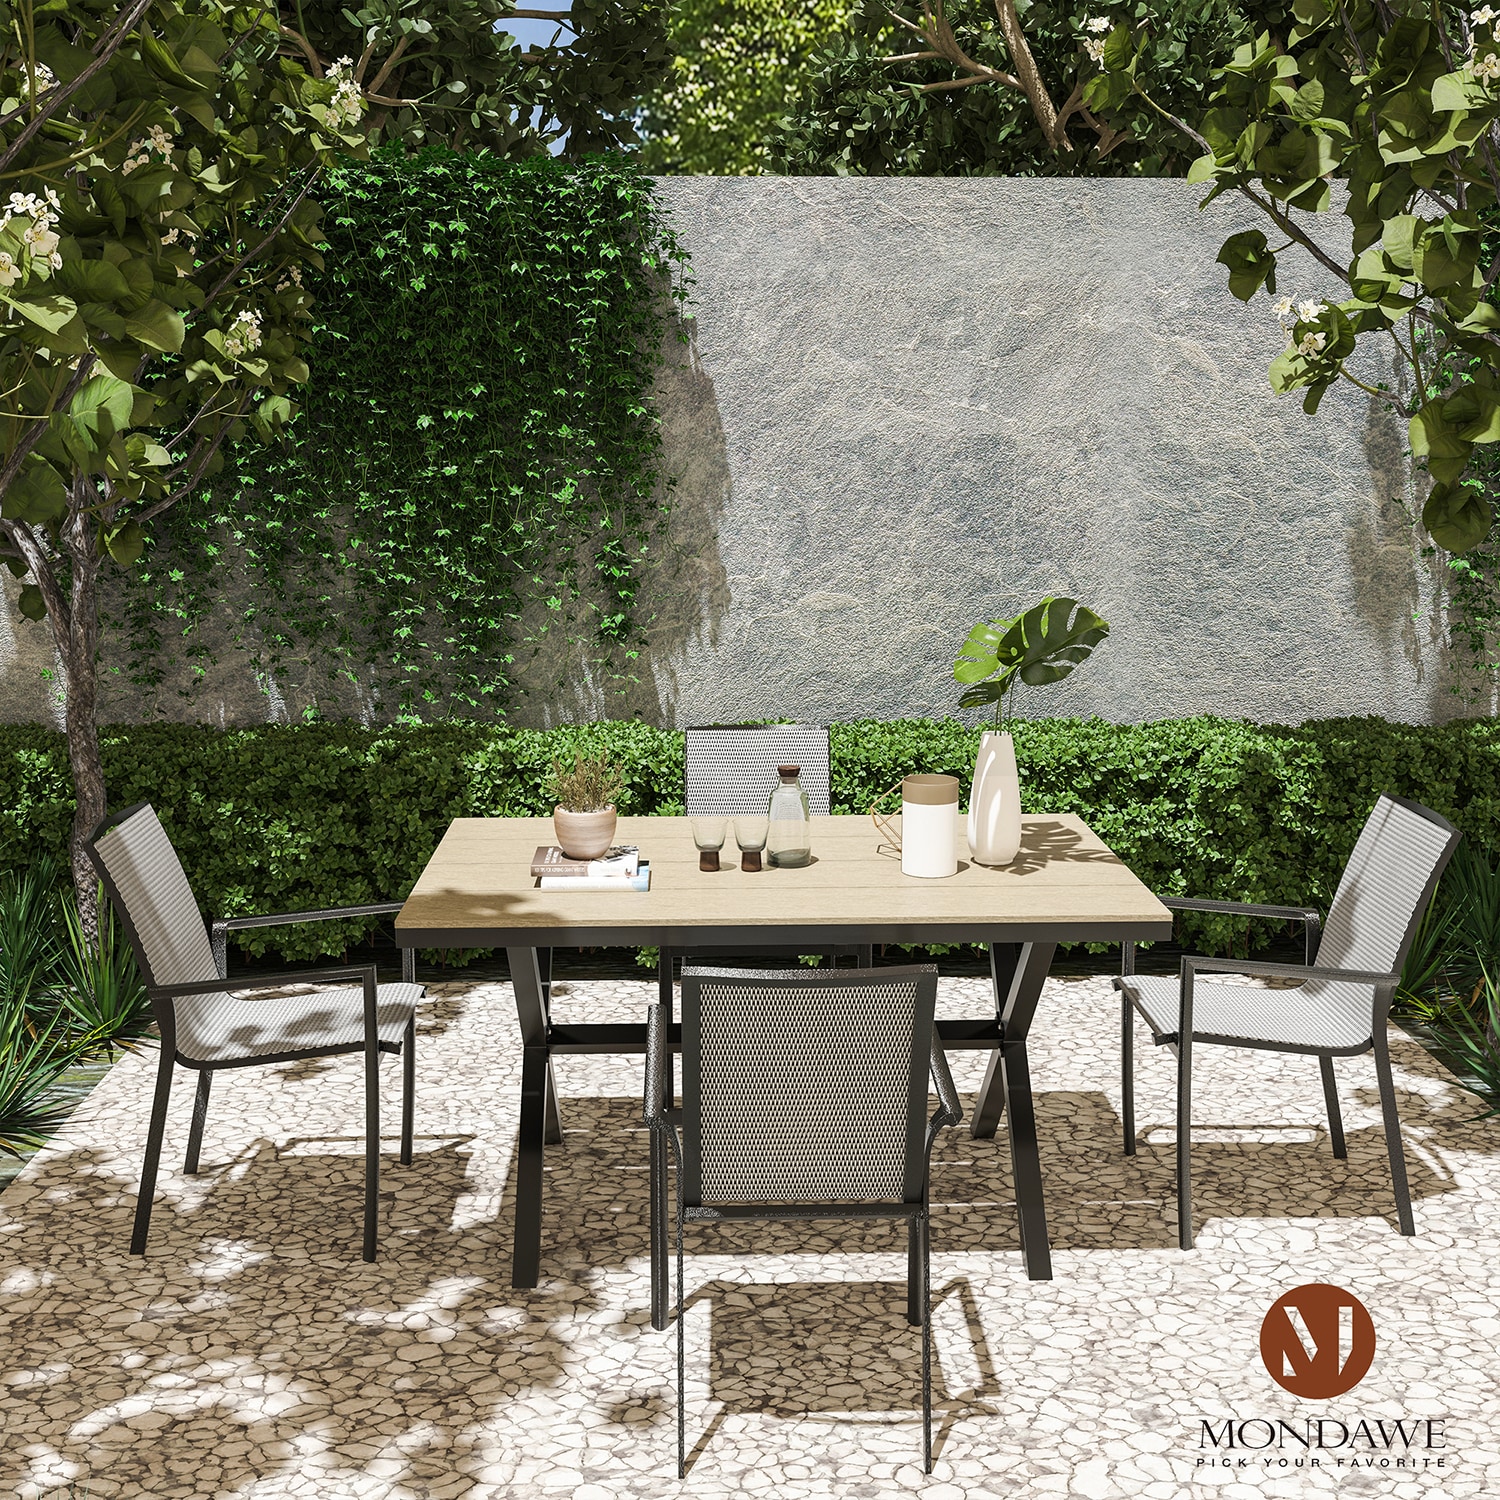 Mondawe Rectangle Outdoor Dining Table 35.4-in W x 59-in L in the Patio ...